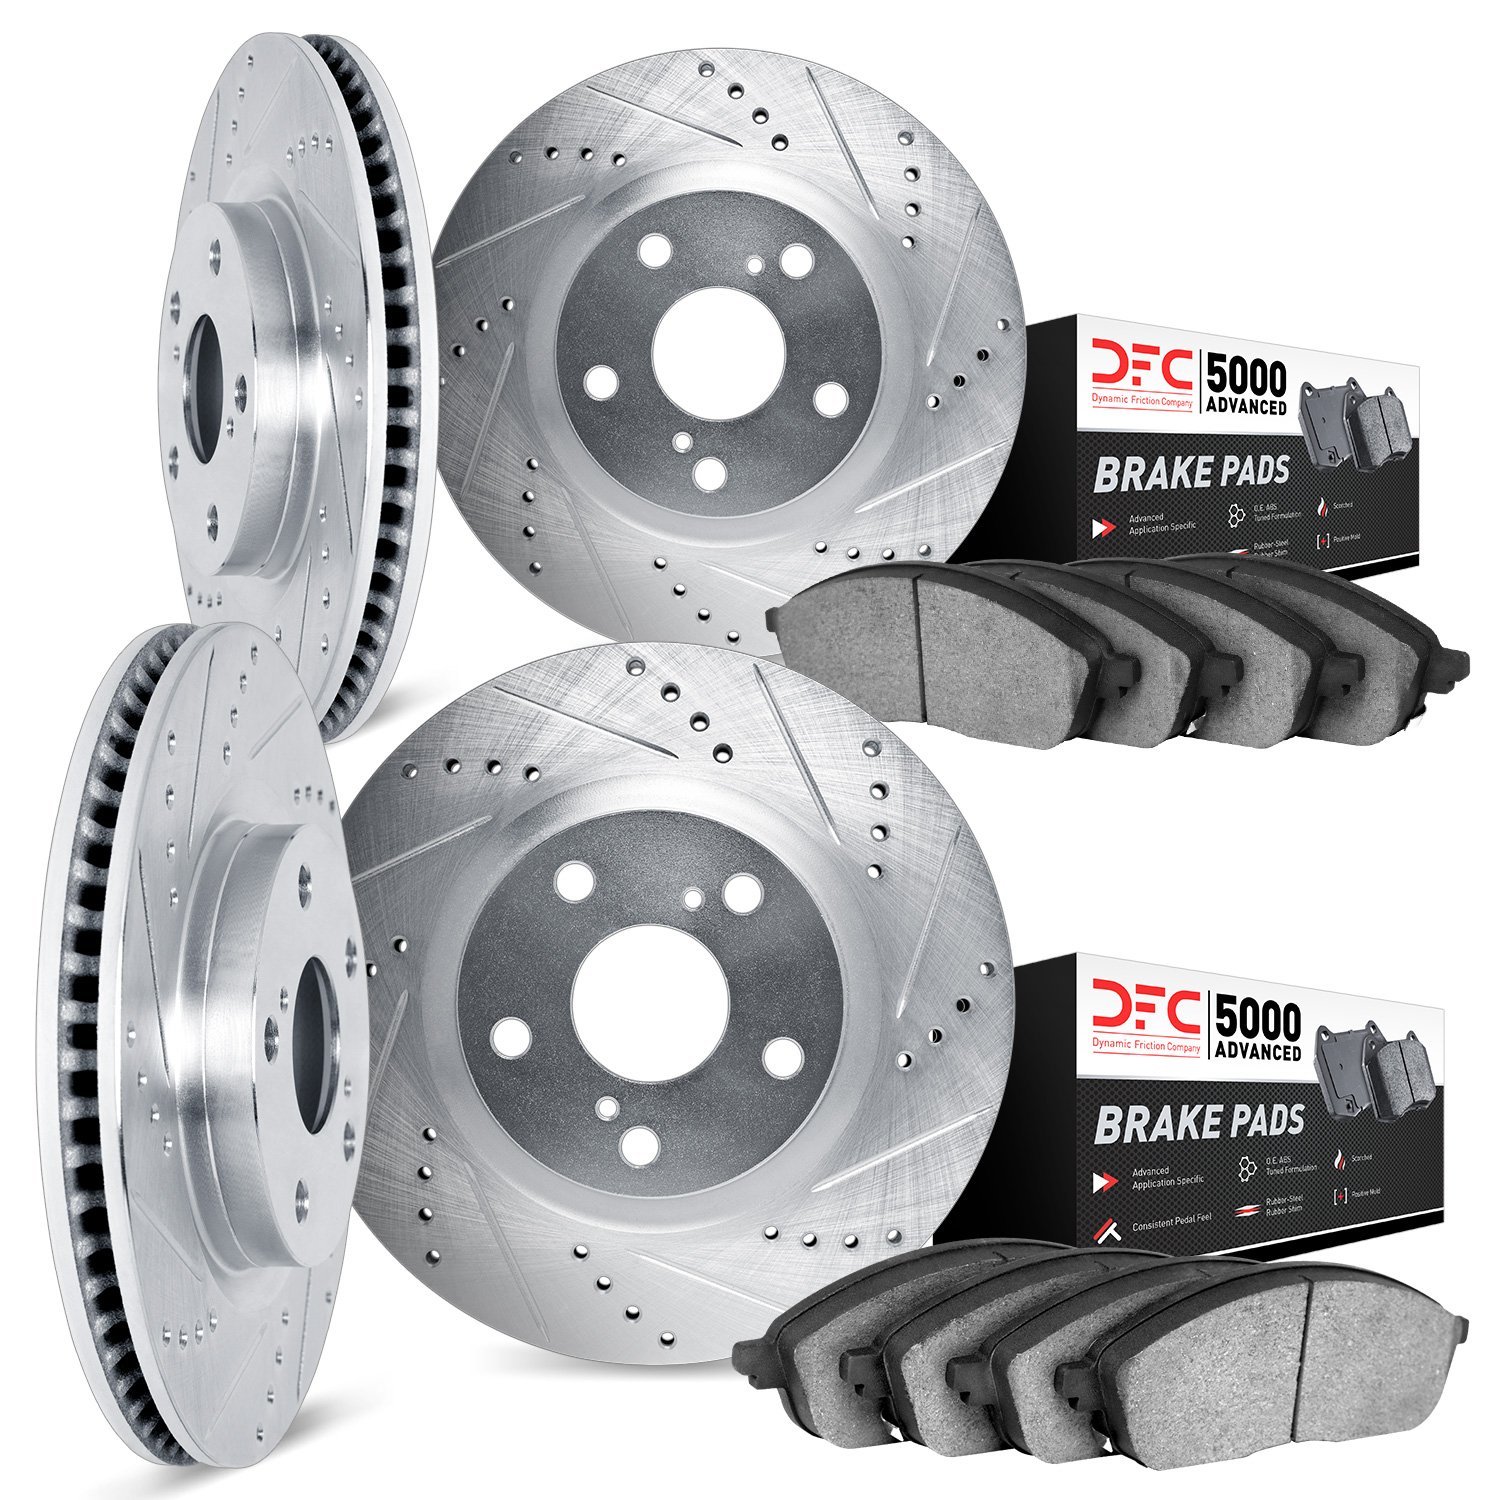 7504-31061 Drilled/Slotted Brake Rotors w/5000 Advanced Brake Pads Kit [Silver], 2002-2006 BMW, Position: Front and Rear